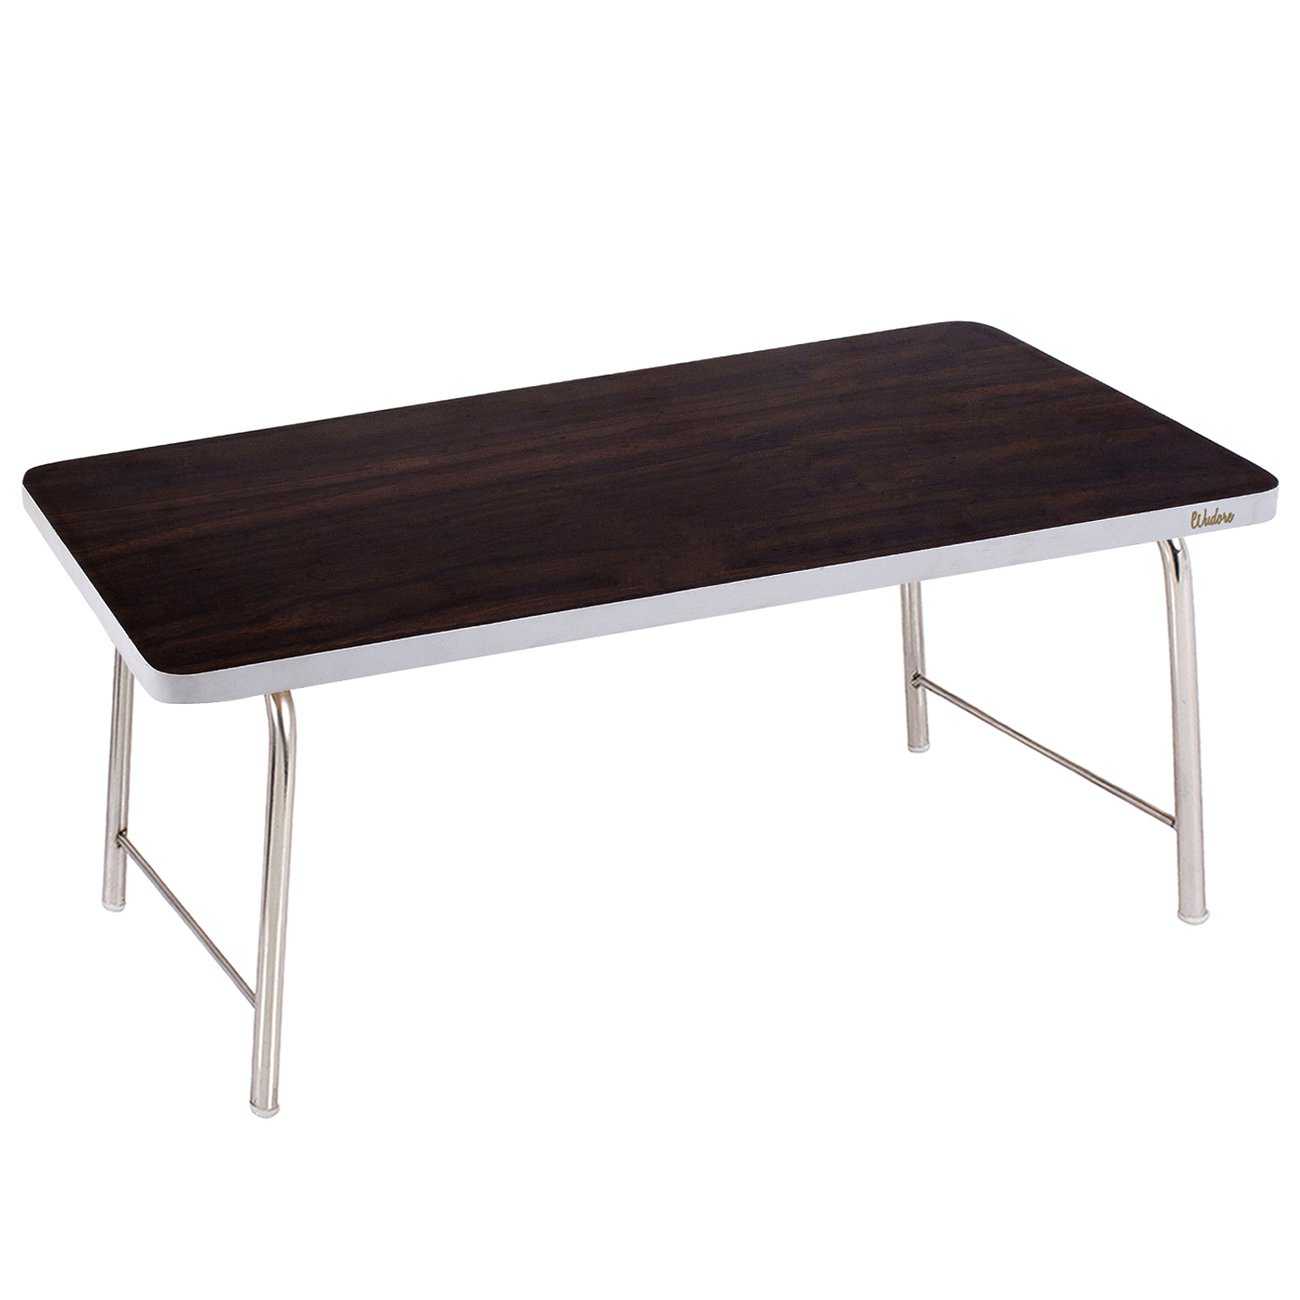 Laptop Table with folding steel legs Black walnut colored | Wudore